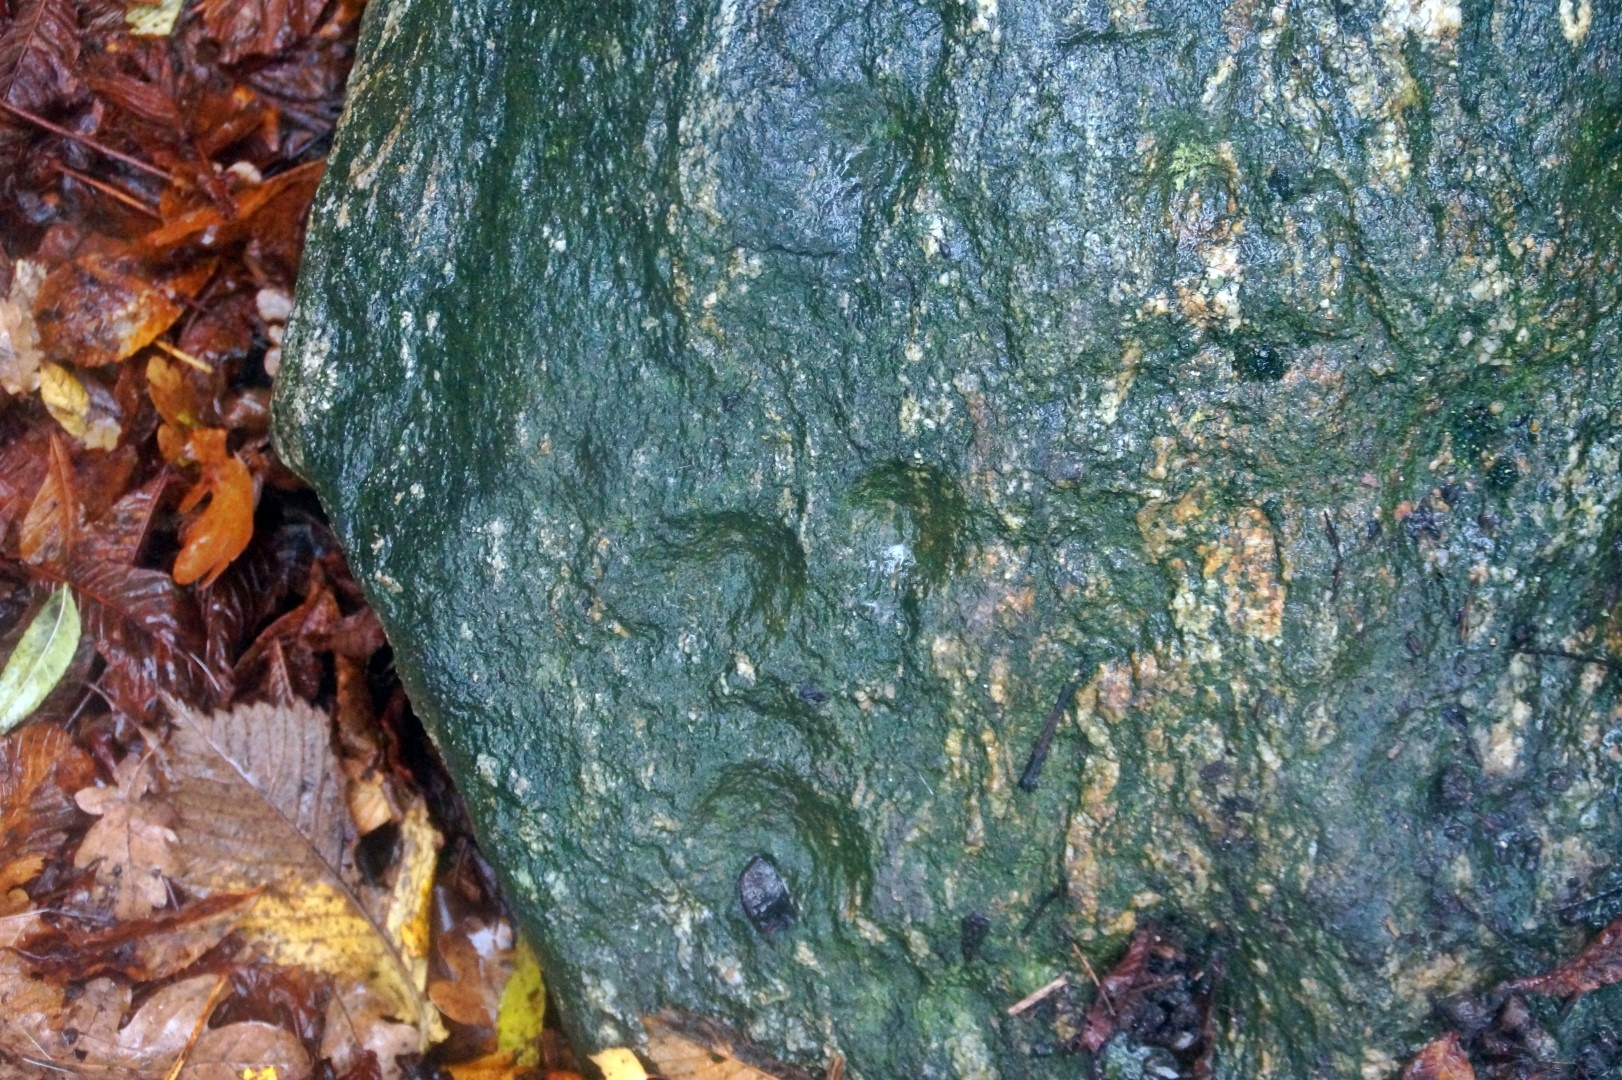 A stone with petroglyphs, presumably from the Bronze Age